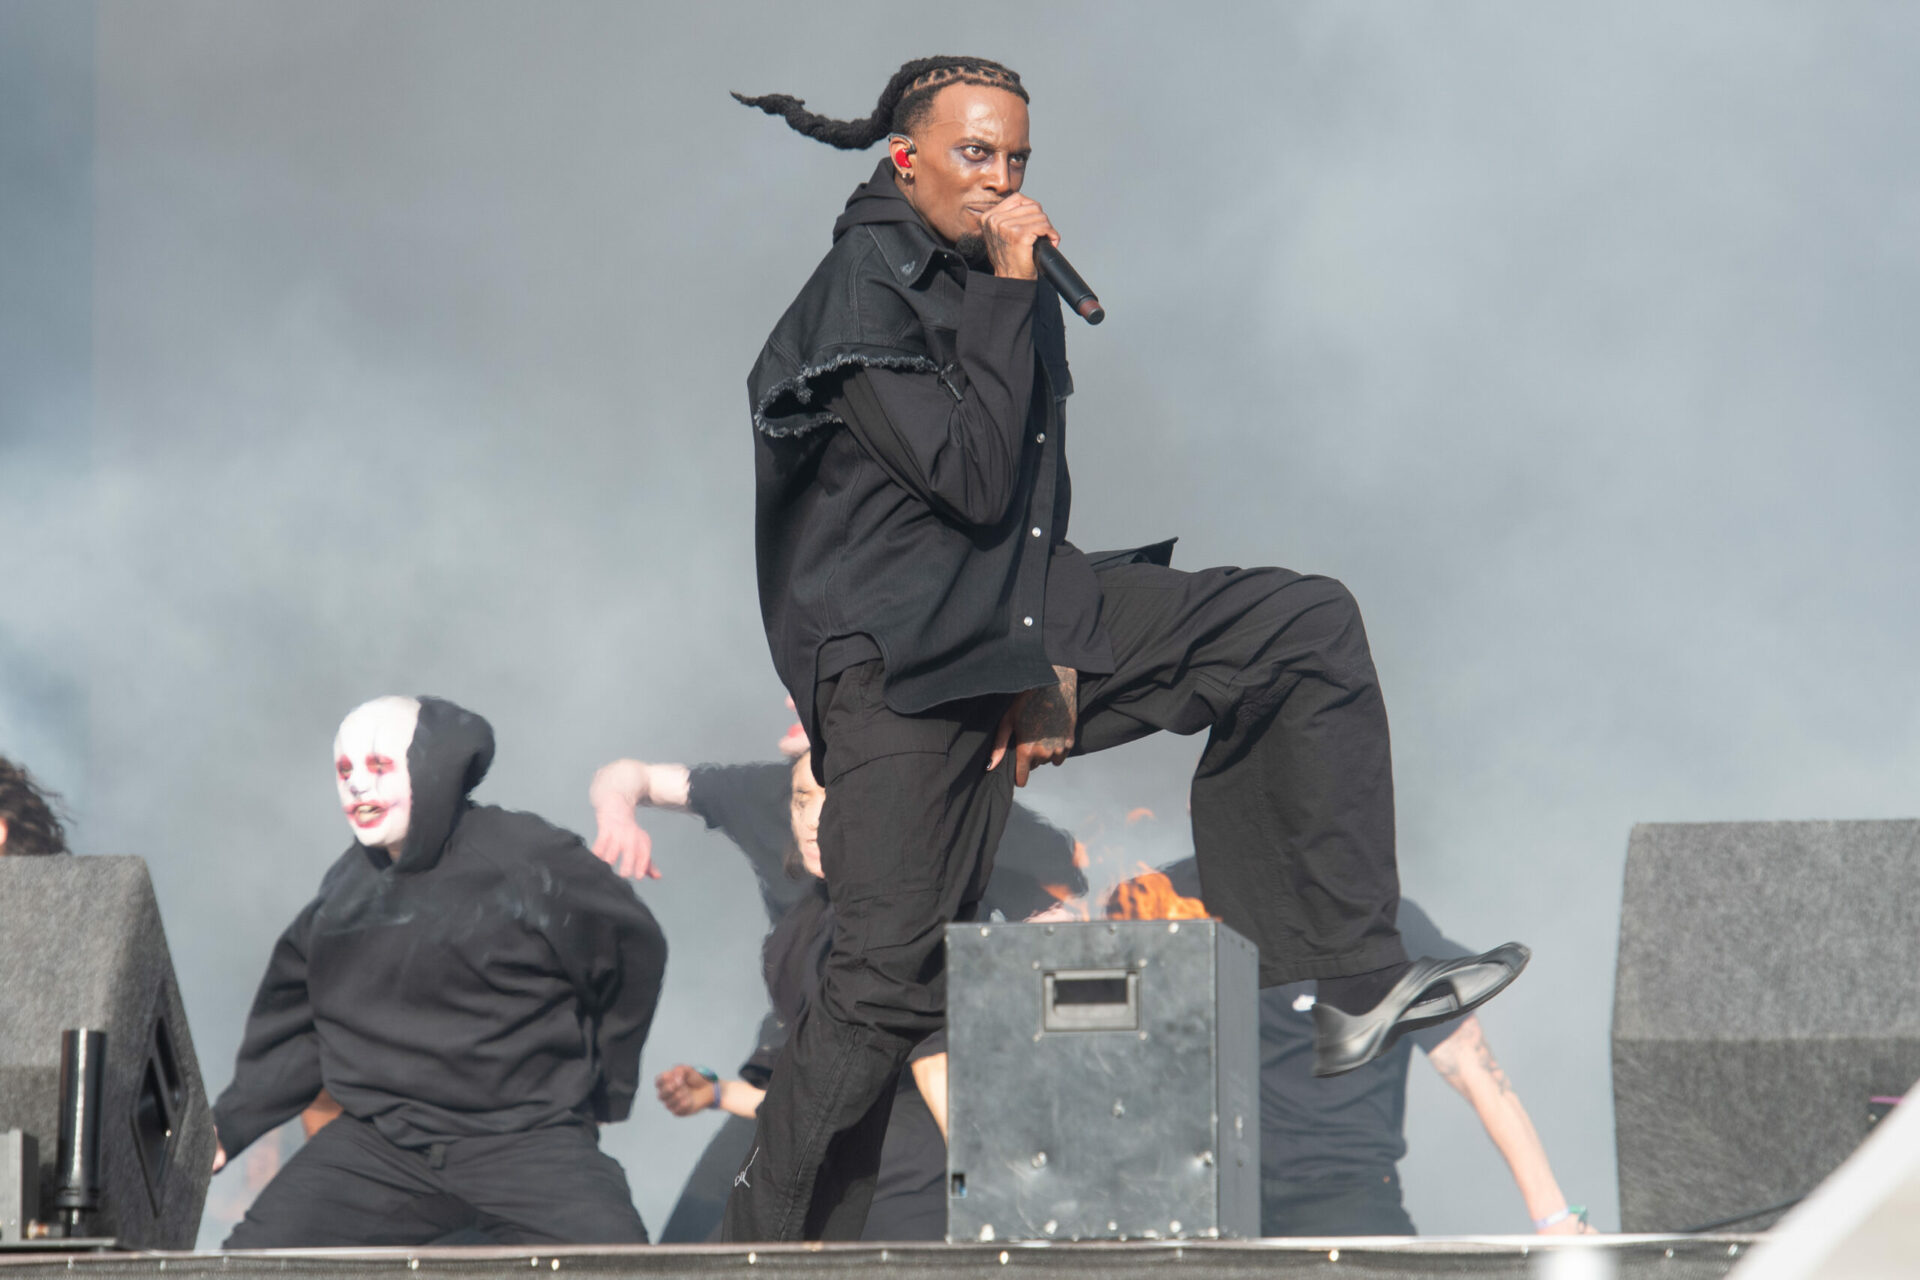 Playboi Carti Unfazed By Fall During Wireless Festival Performance 